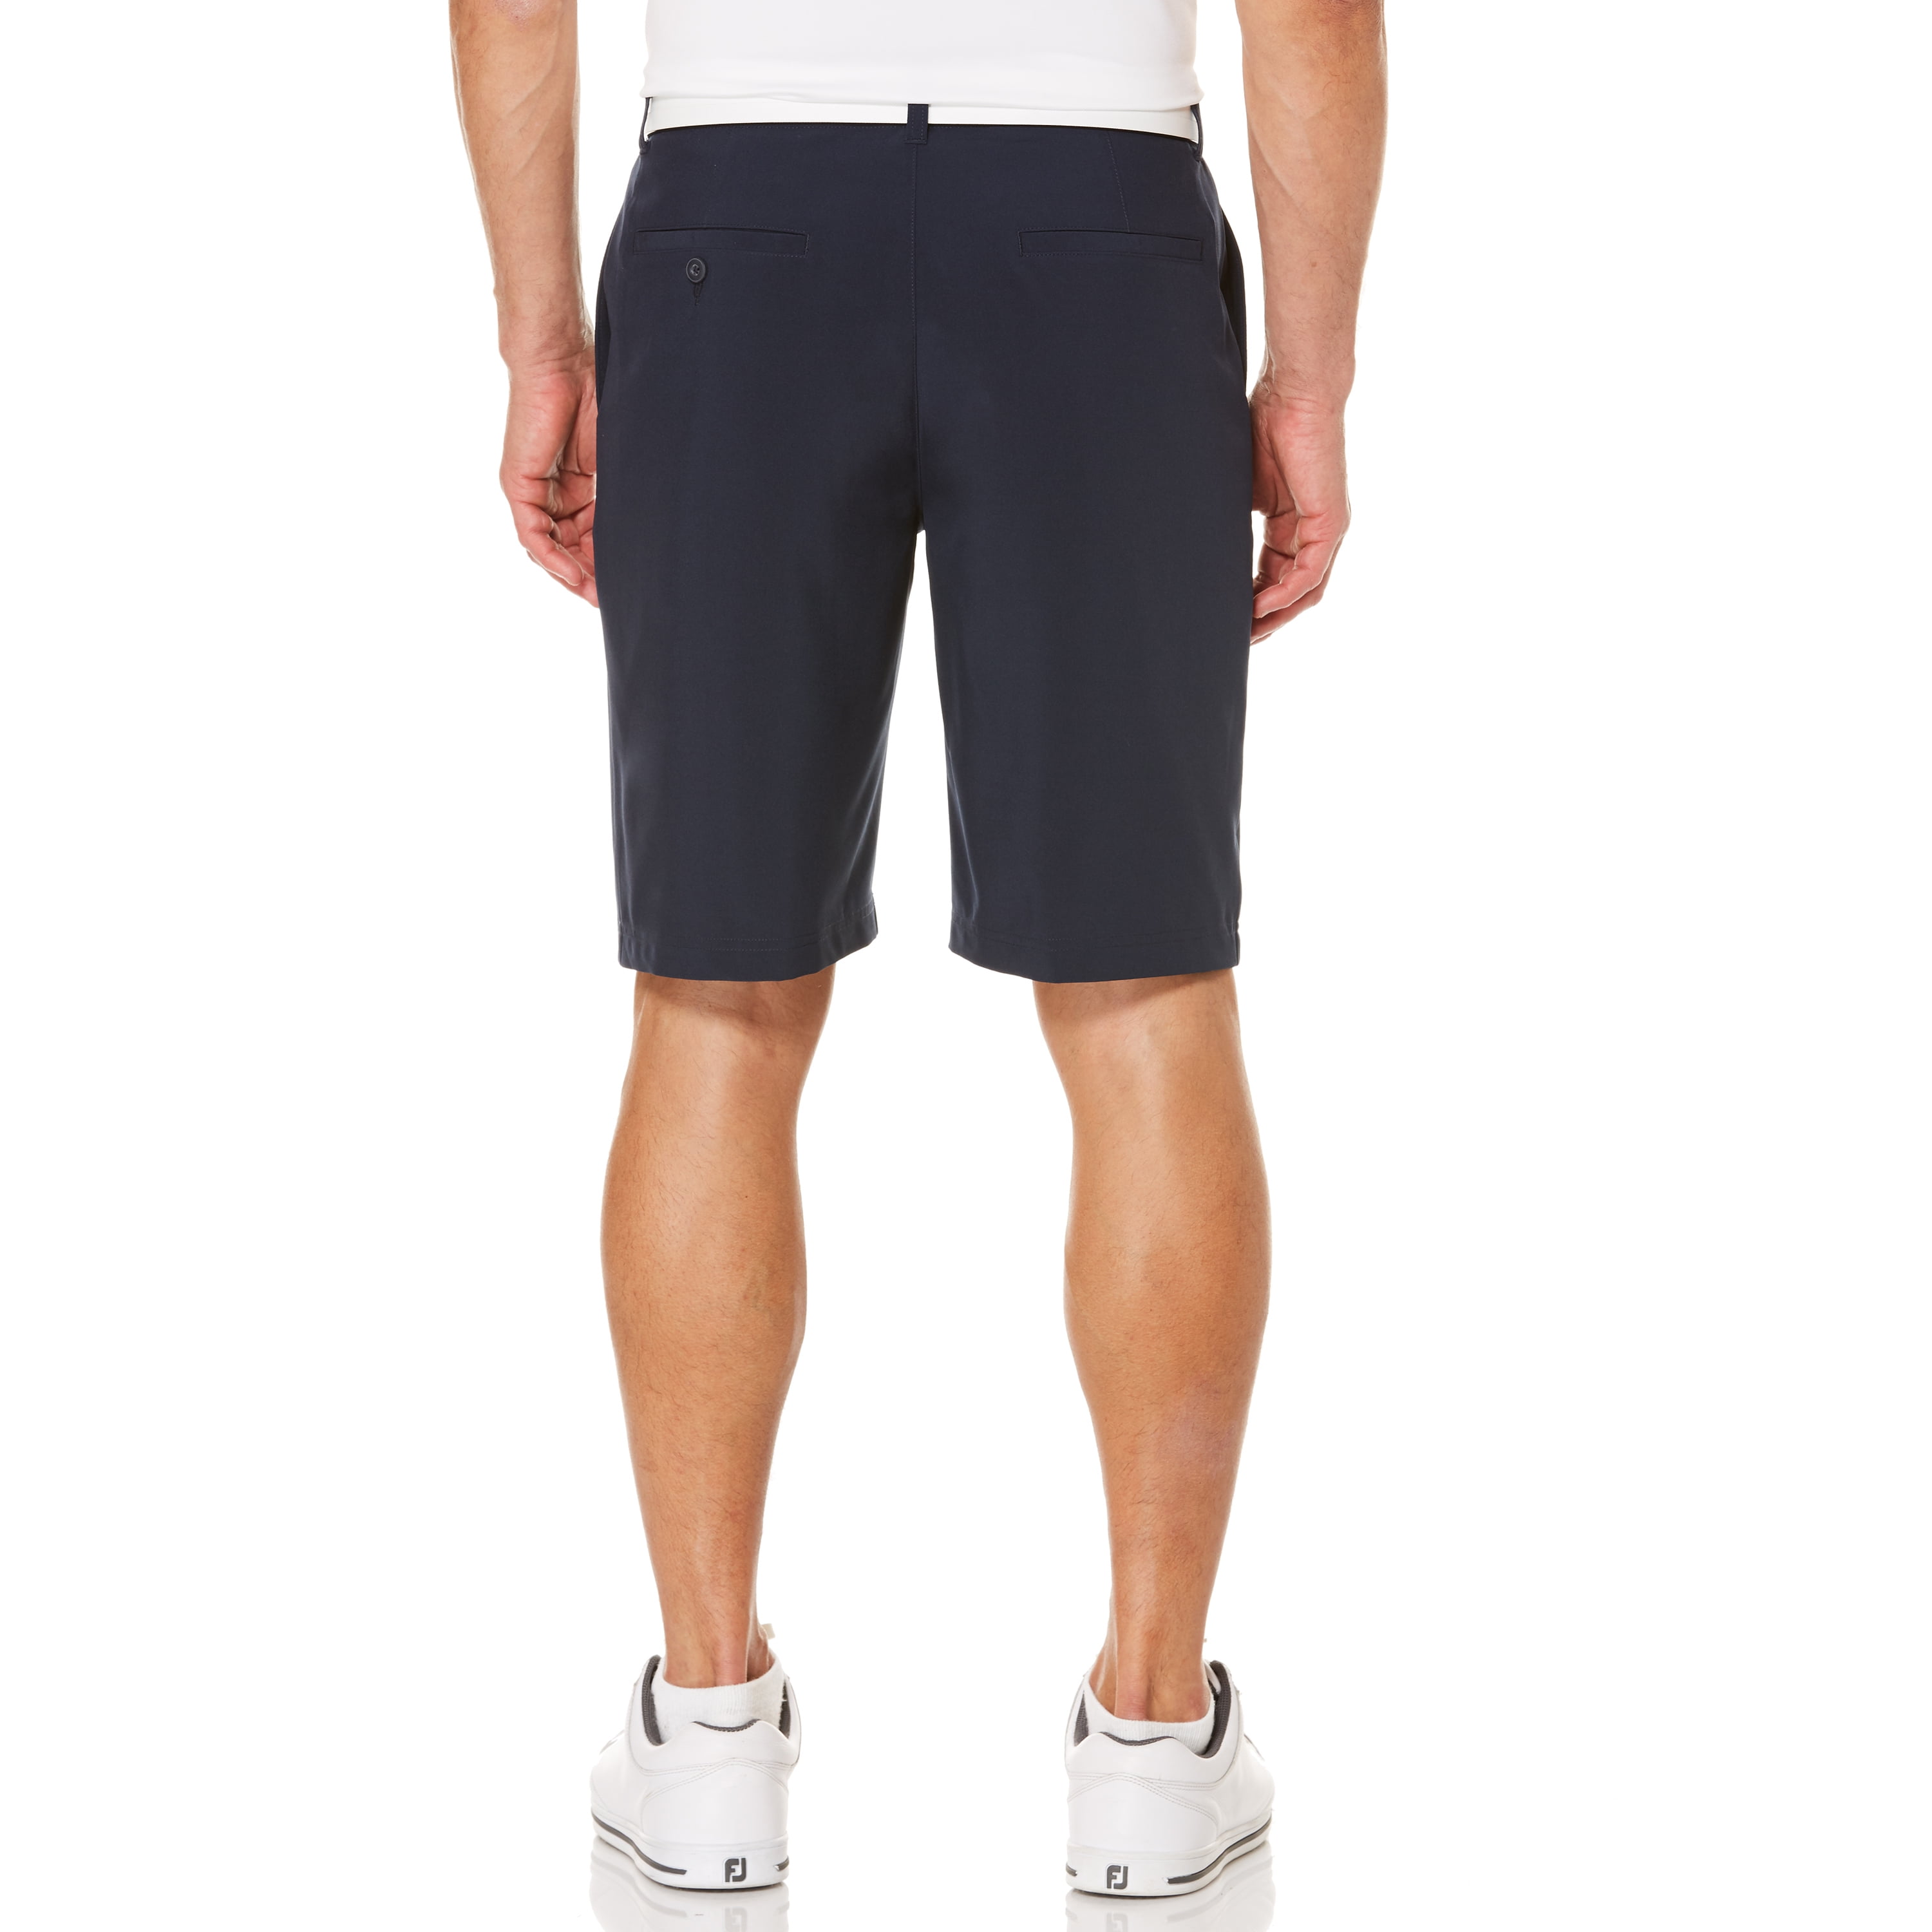 Buy > relaxed fit golf shorts > in stock